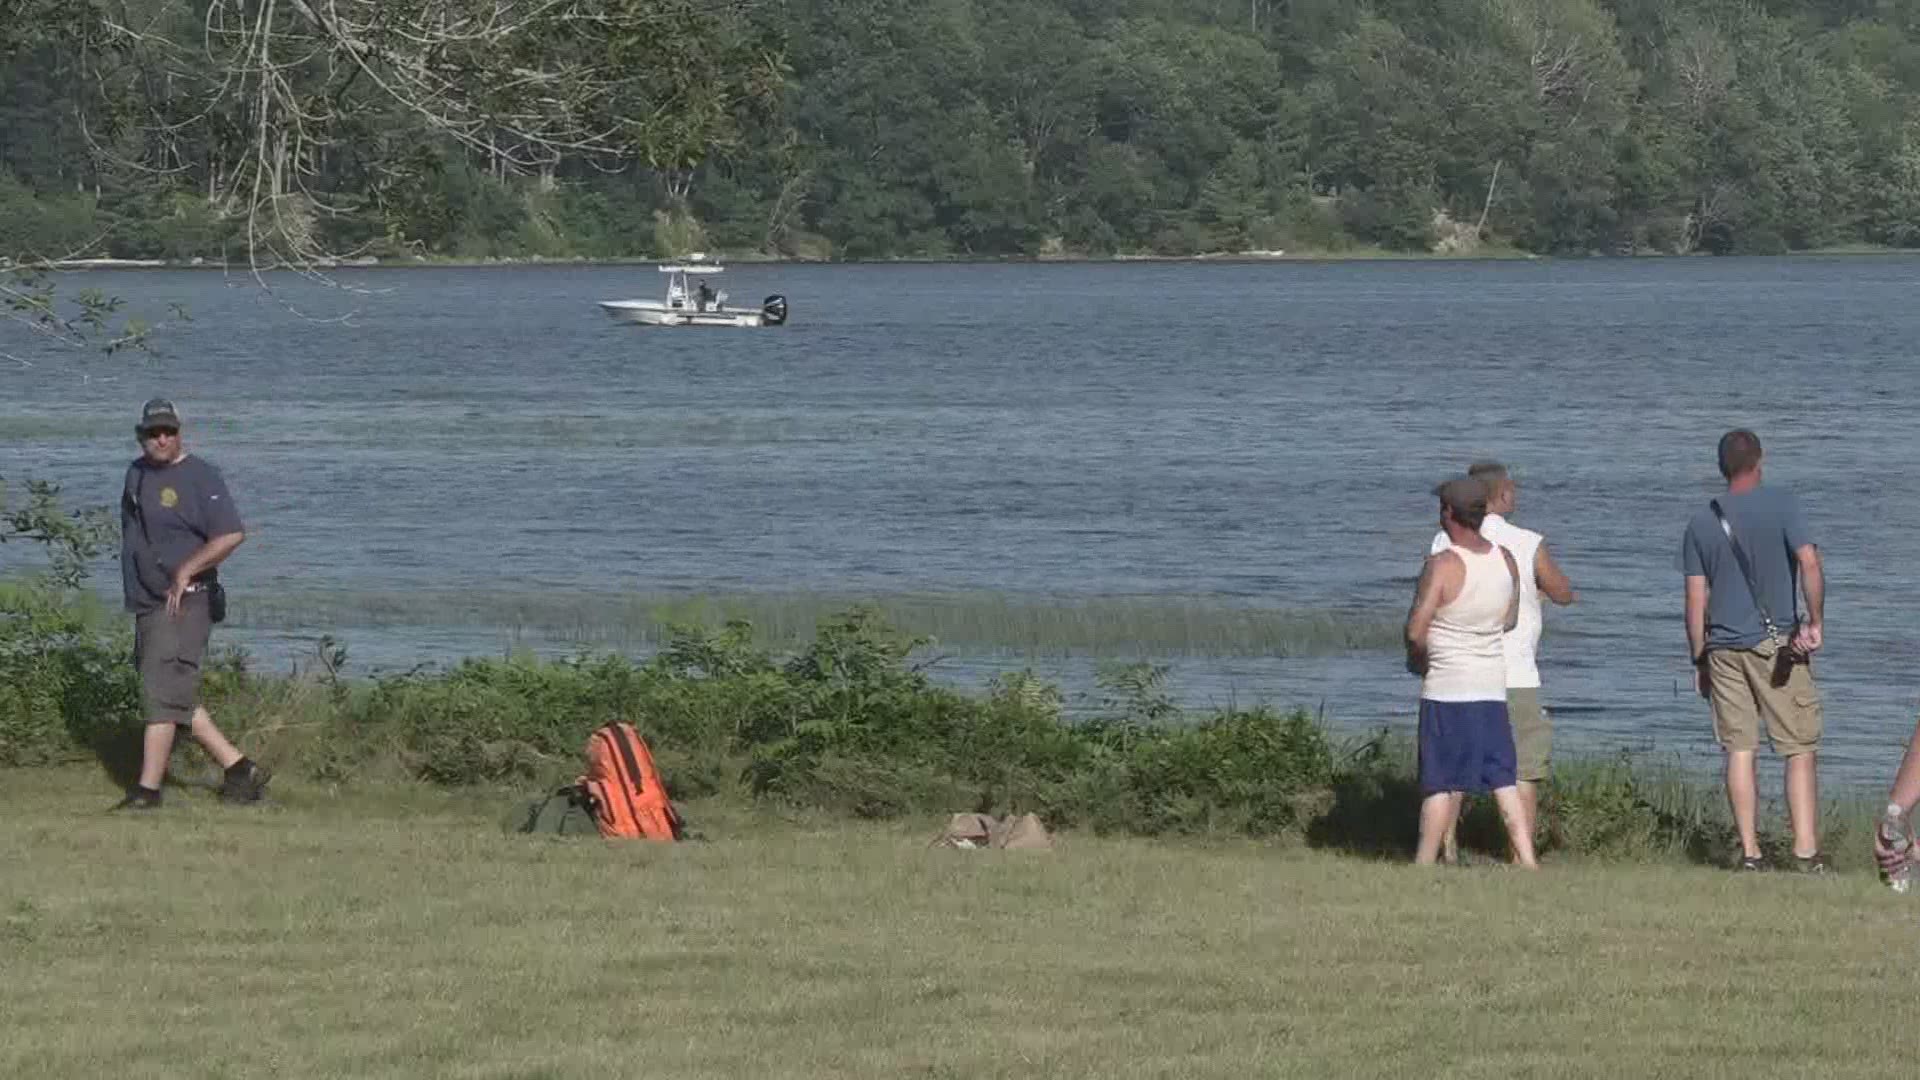 The body of the man who went missing Saturday was recovered Sunday morning in the Kennebec River.